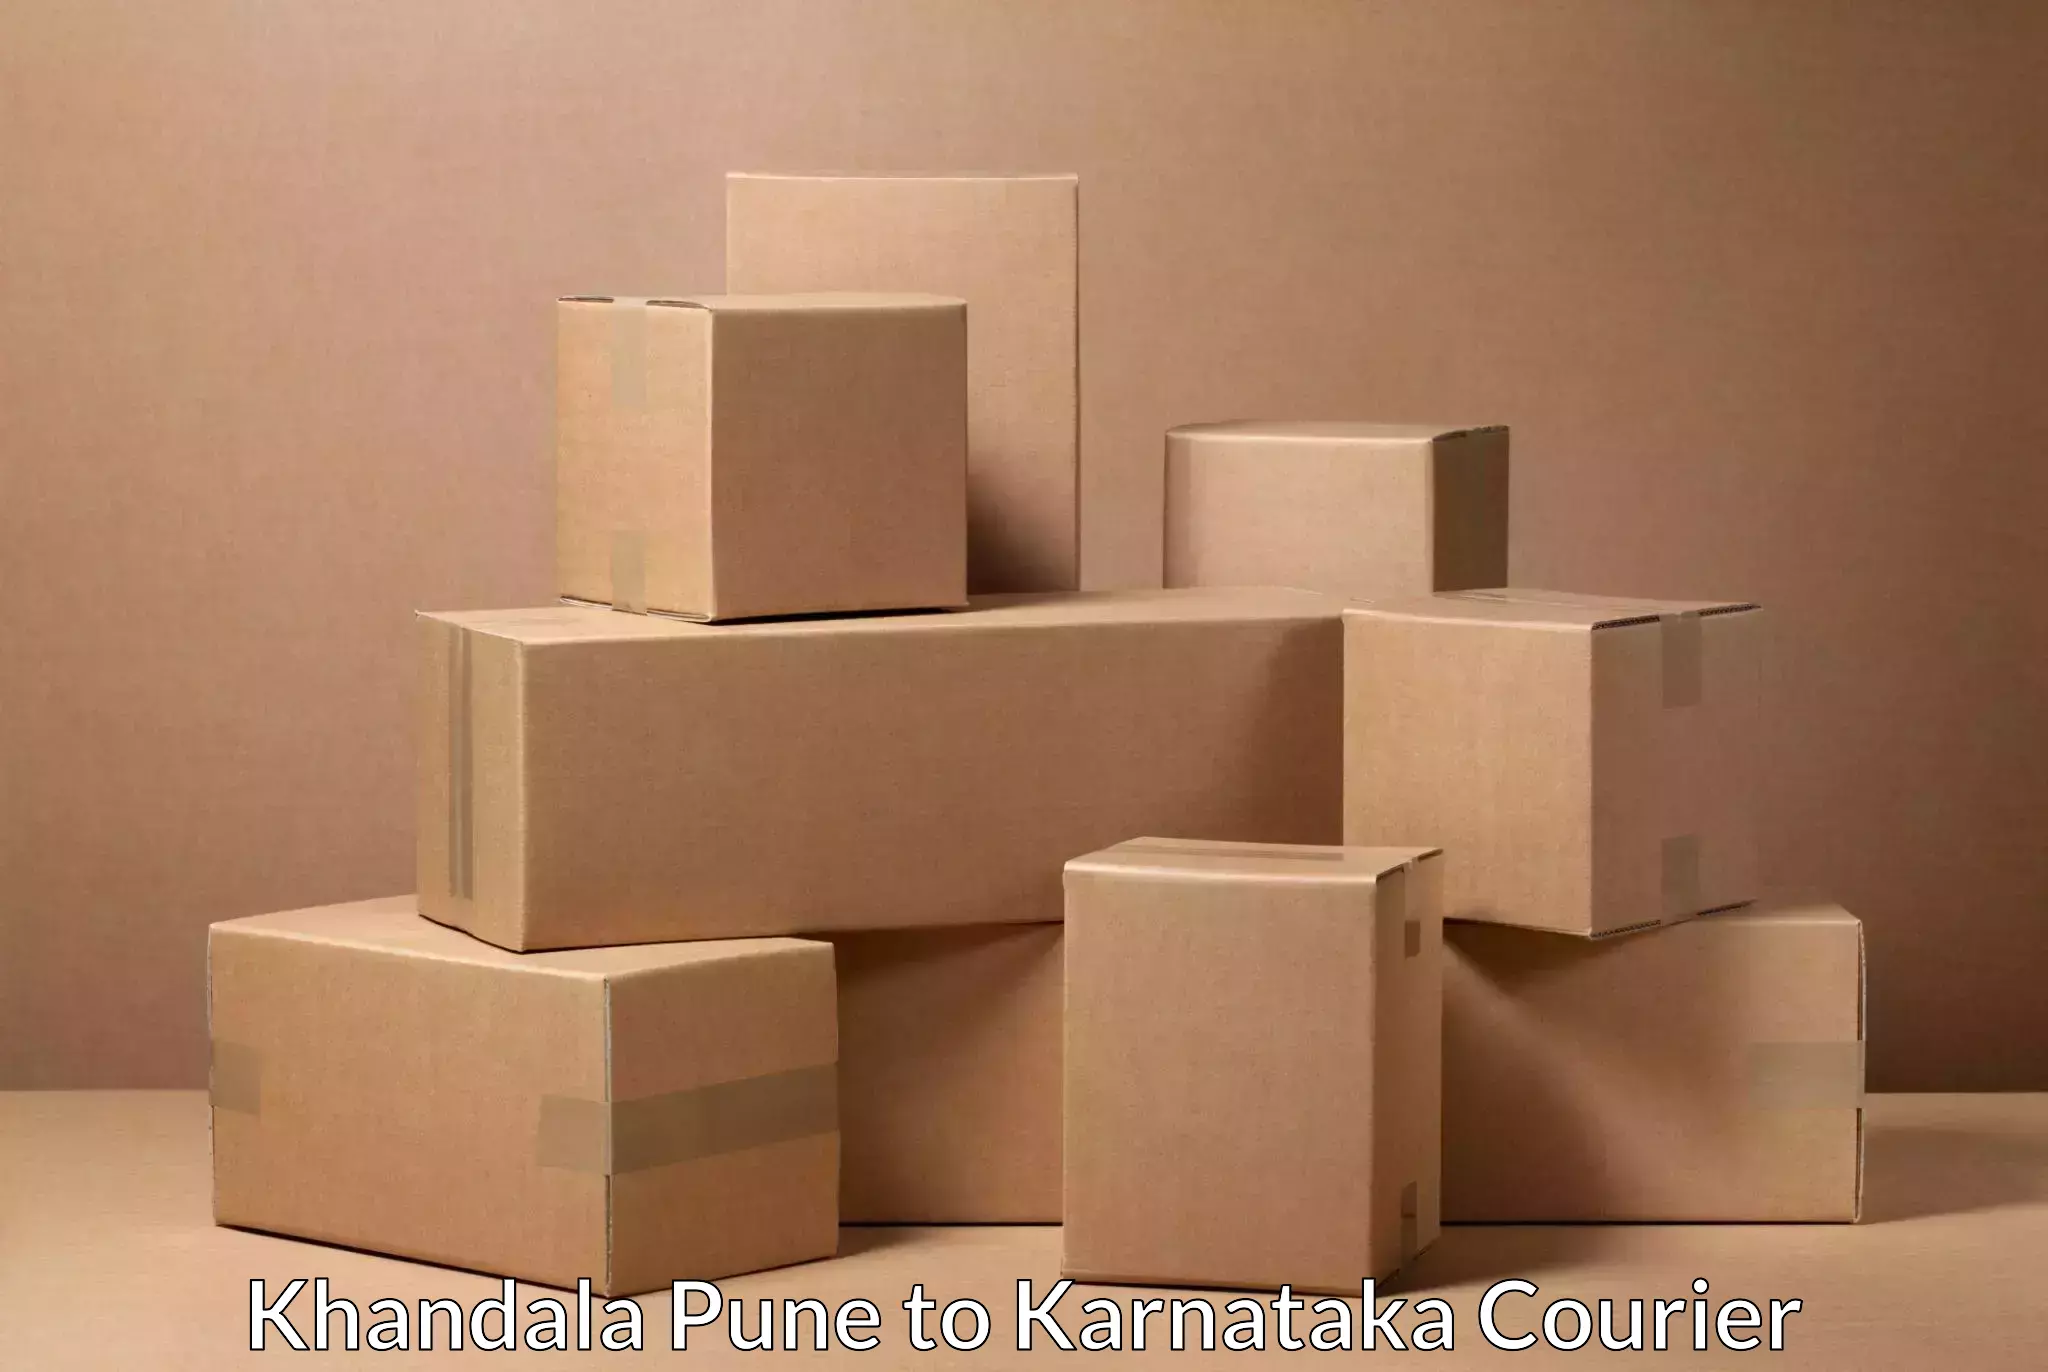 Residential courier service Khandala Pune to Yadgir